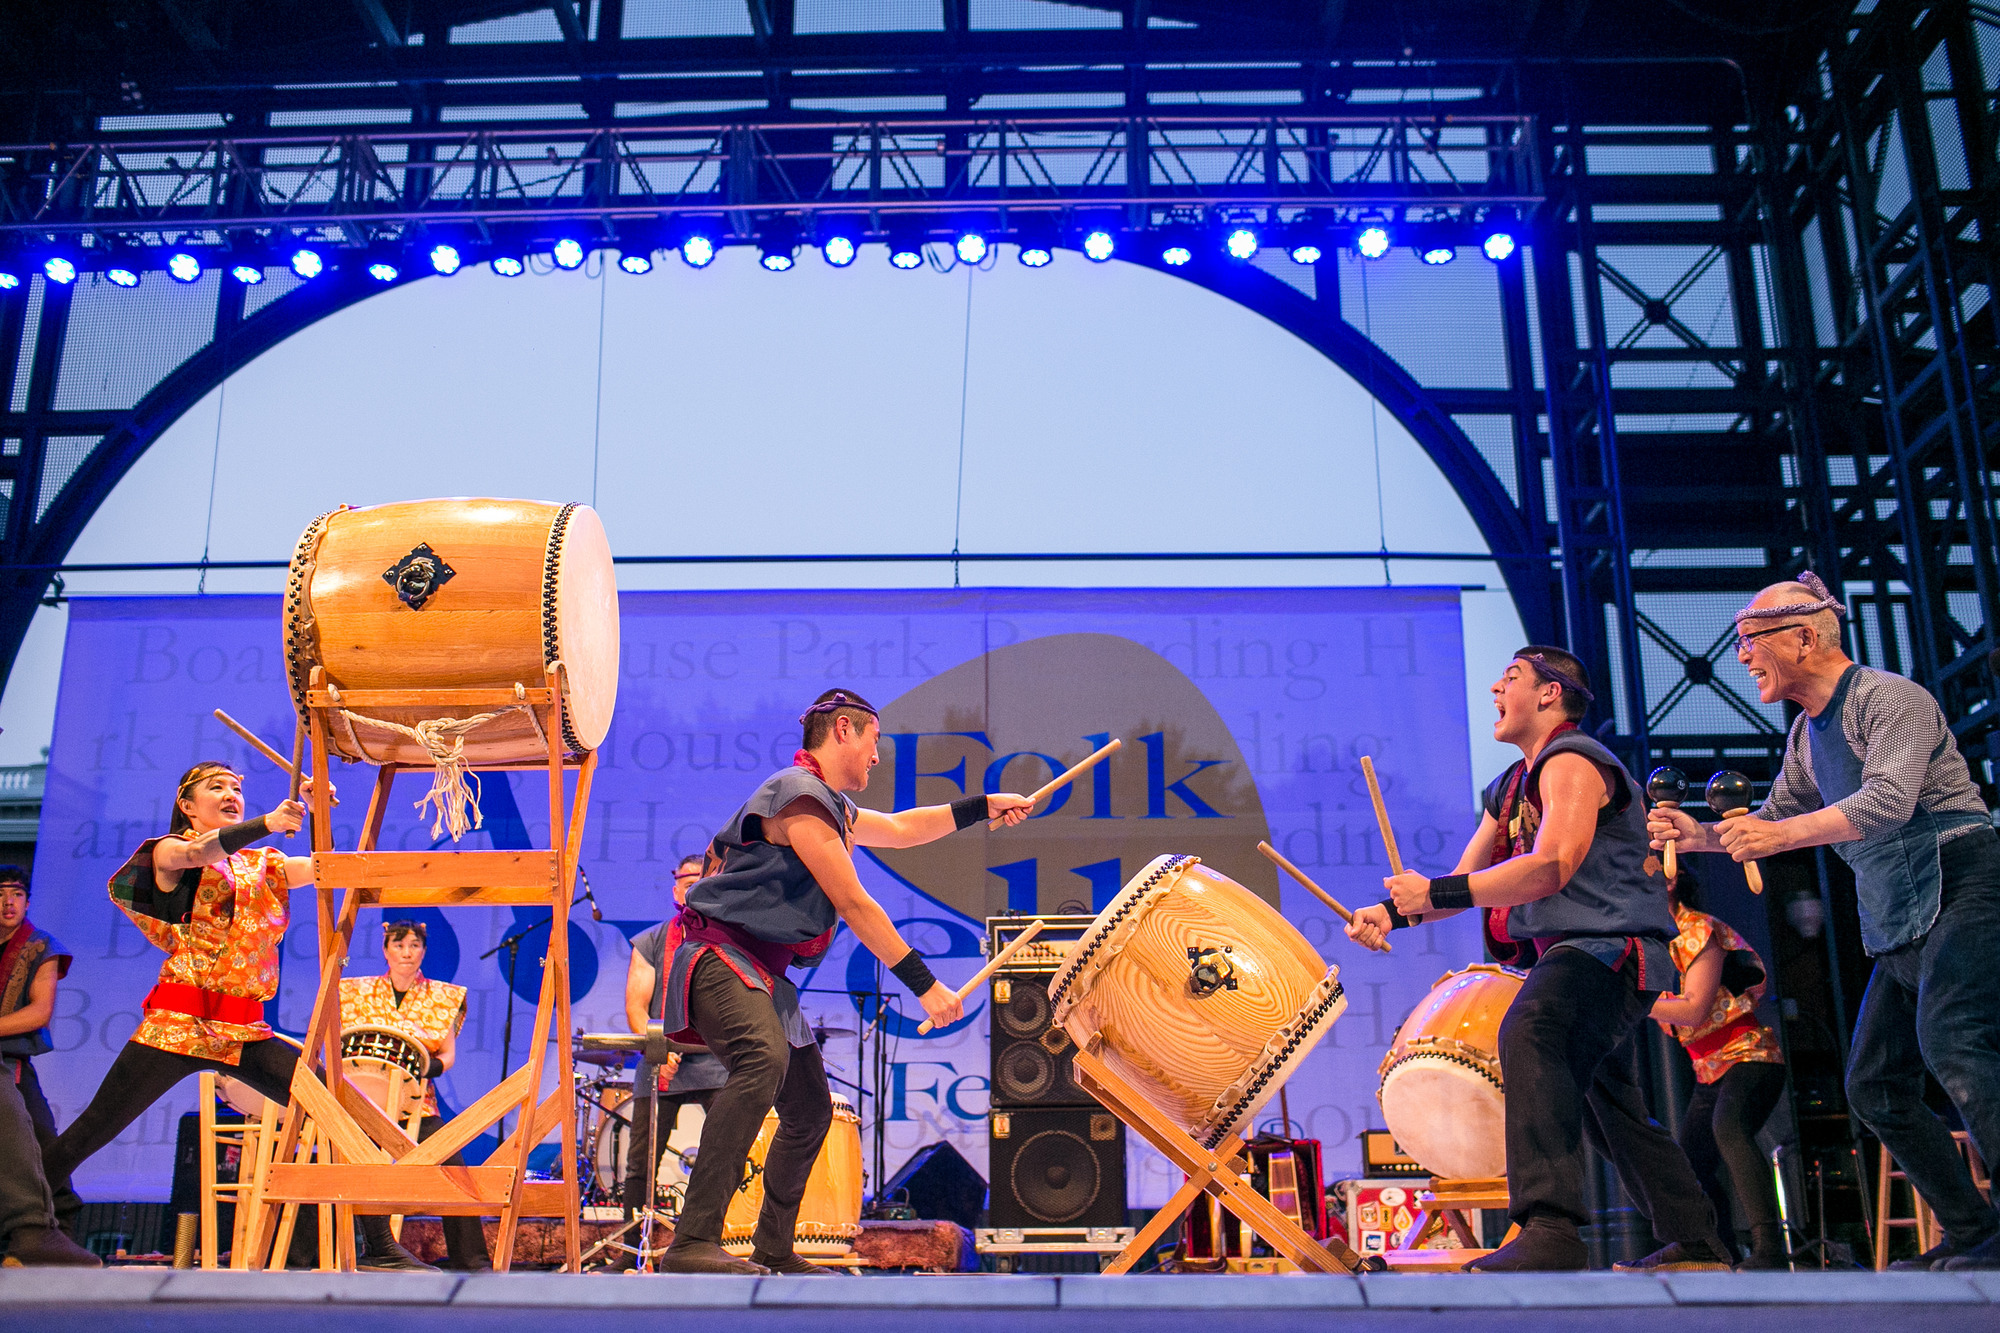 On stage, under the hue of blue lights, performers lean toward the taiko drums with a degree of bend in their knees. Two performers play on a drum on a slanted stand; a performer hits a drum on an elevated stand; and, an older performer has a rattle in each hand.